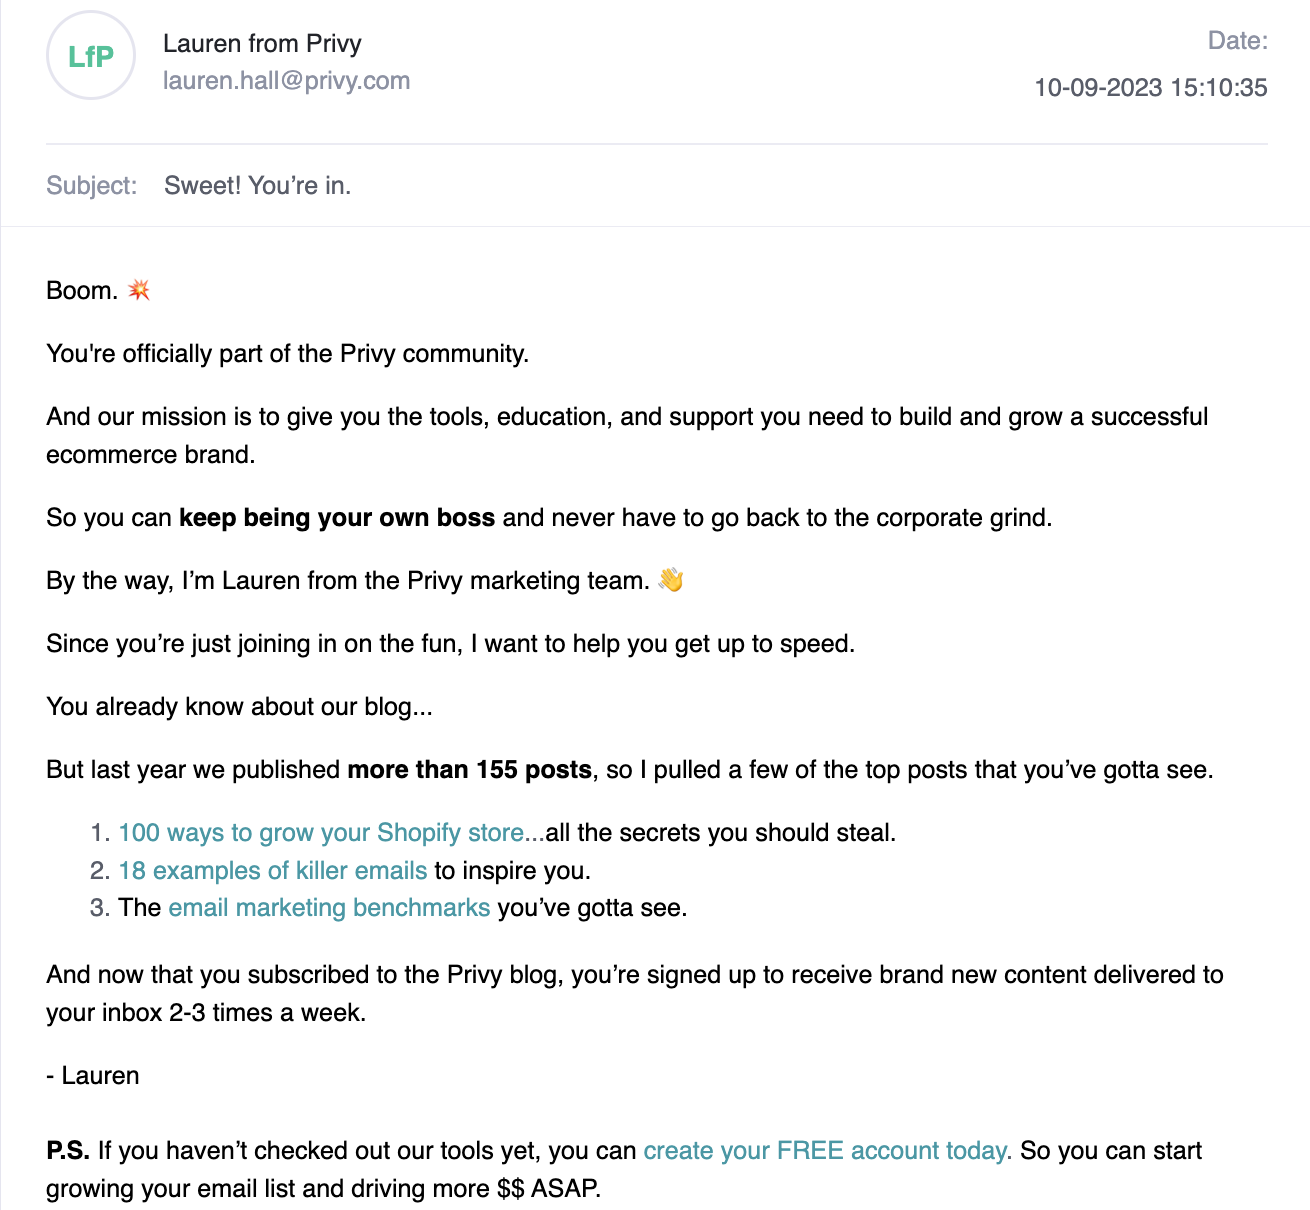 Privy's welcome email to a new subscriber